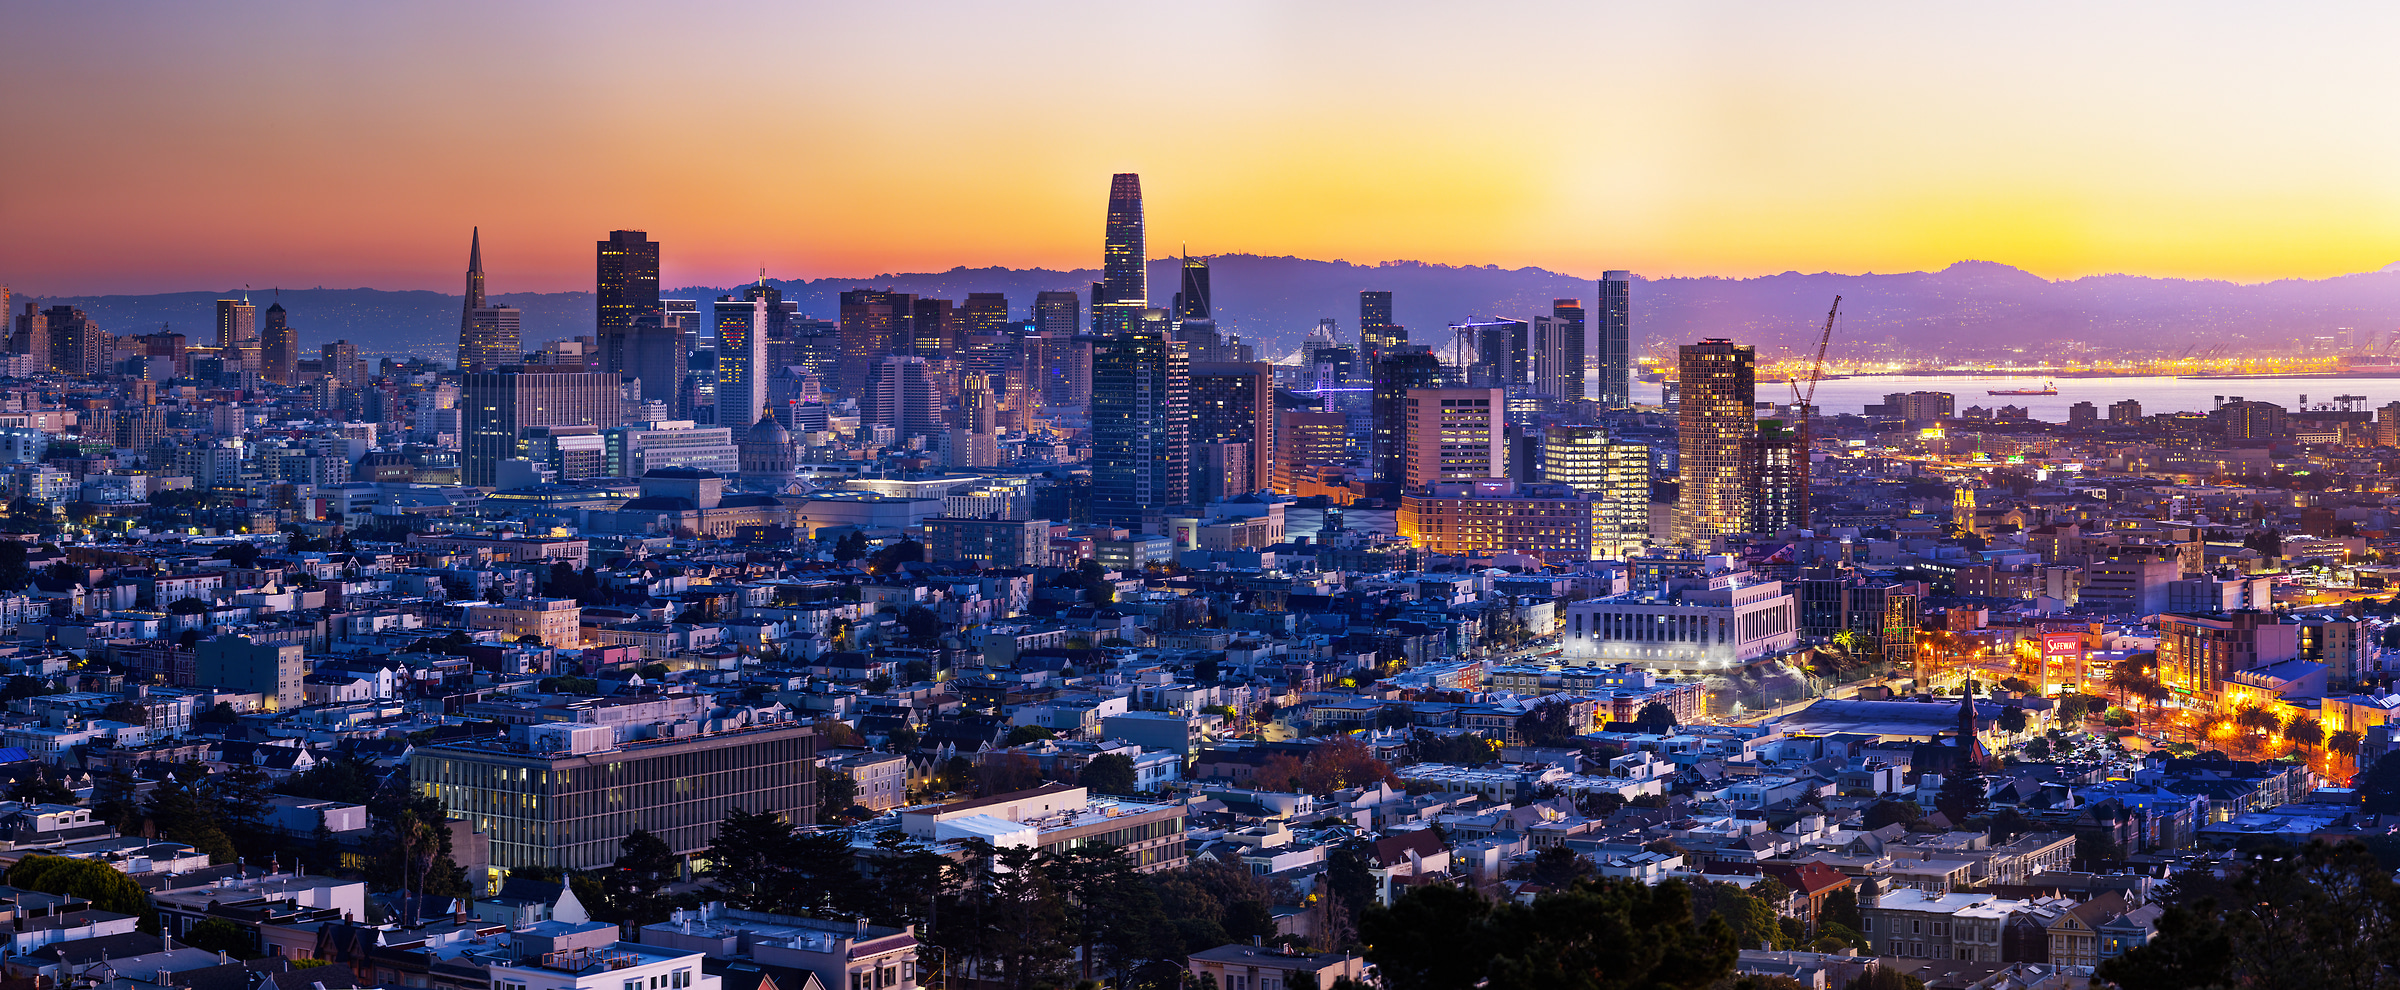 359 megapixels! A very high resolution, large-format VAST photo print of San Francisco at sunrise; skyline photograph created by Nicholas Gonzales in Tank Hill, San Francisco, California